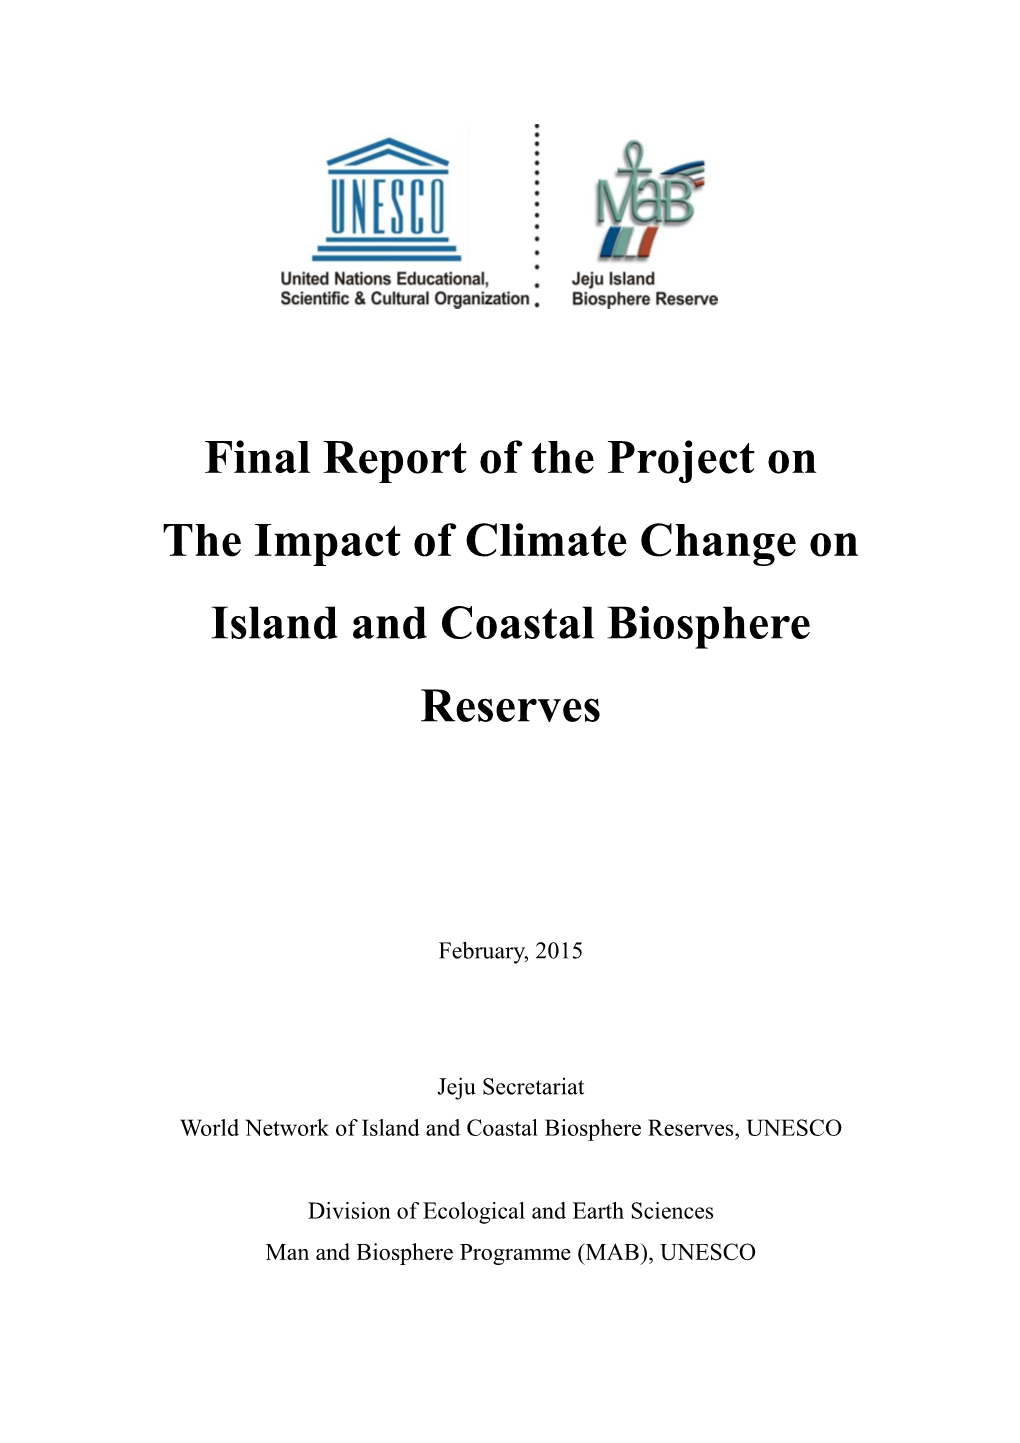 Final Report of the Project on the Impact of Climate Change on Island and Coastal Biosphere Reserves